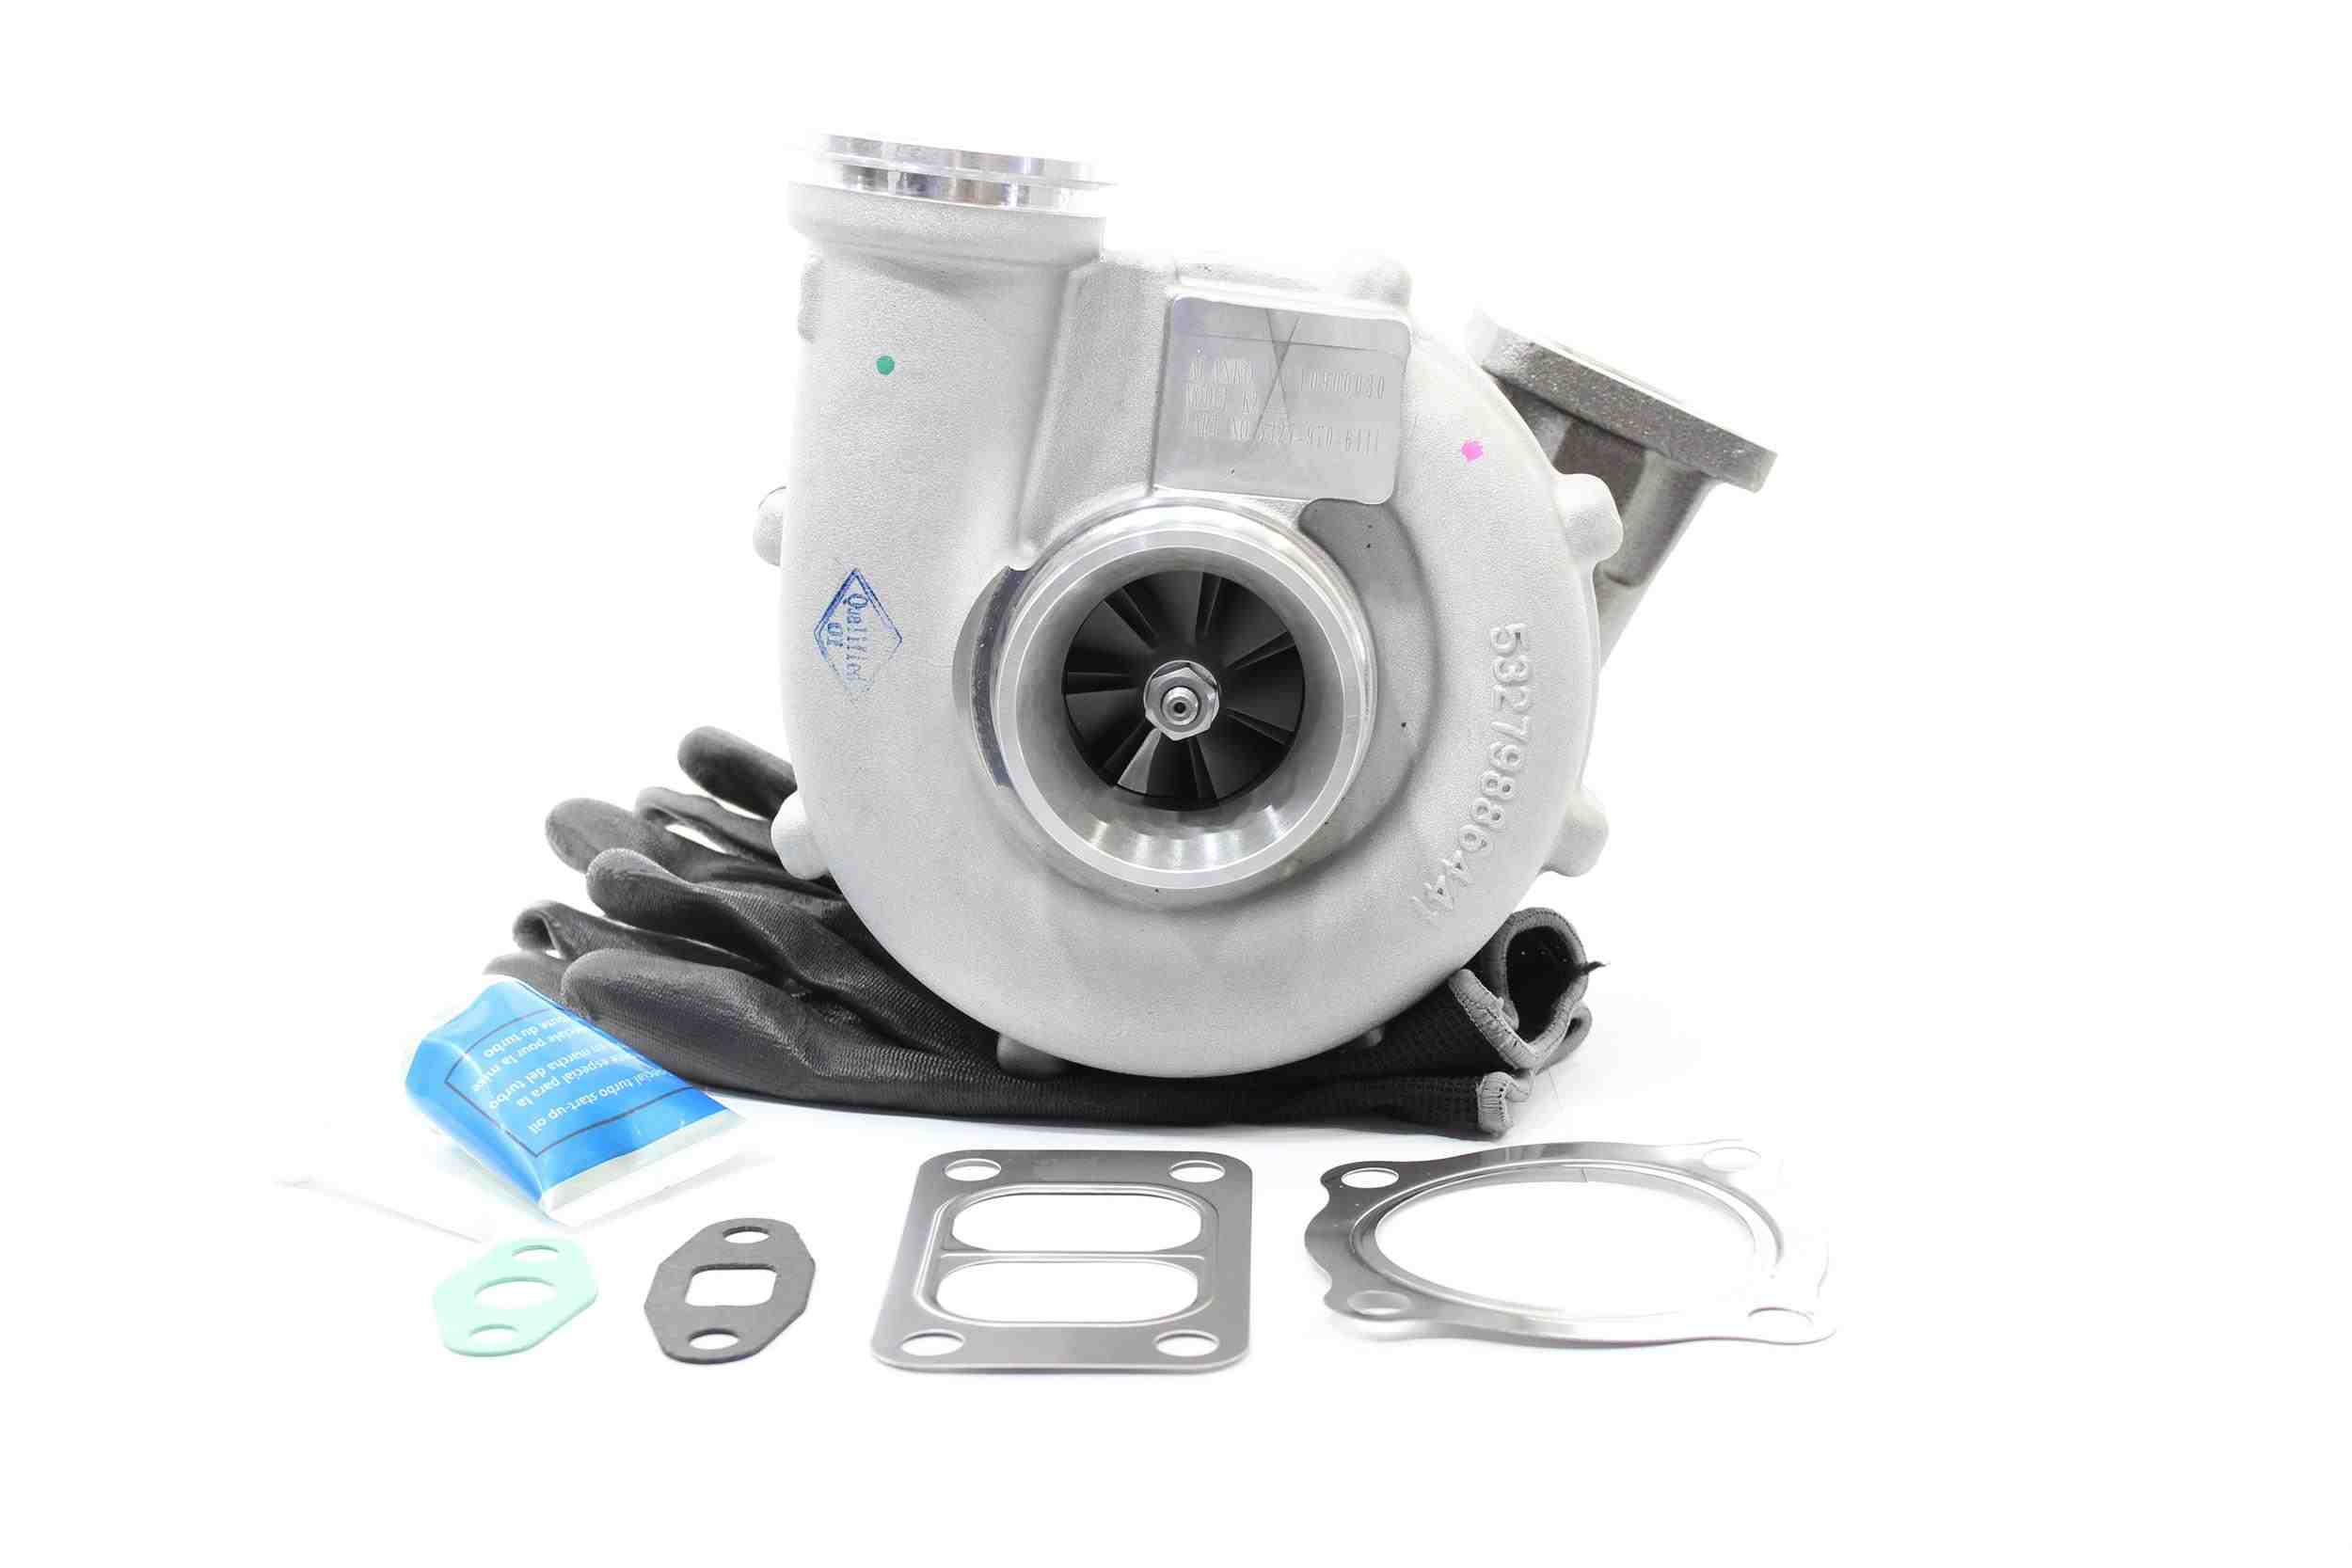 ALANKO 10900030 Turbocharger Exhaust Turbocharger, Incl. Gasket Set, with attachment material